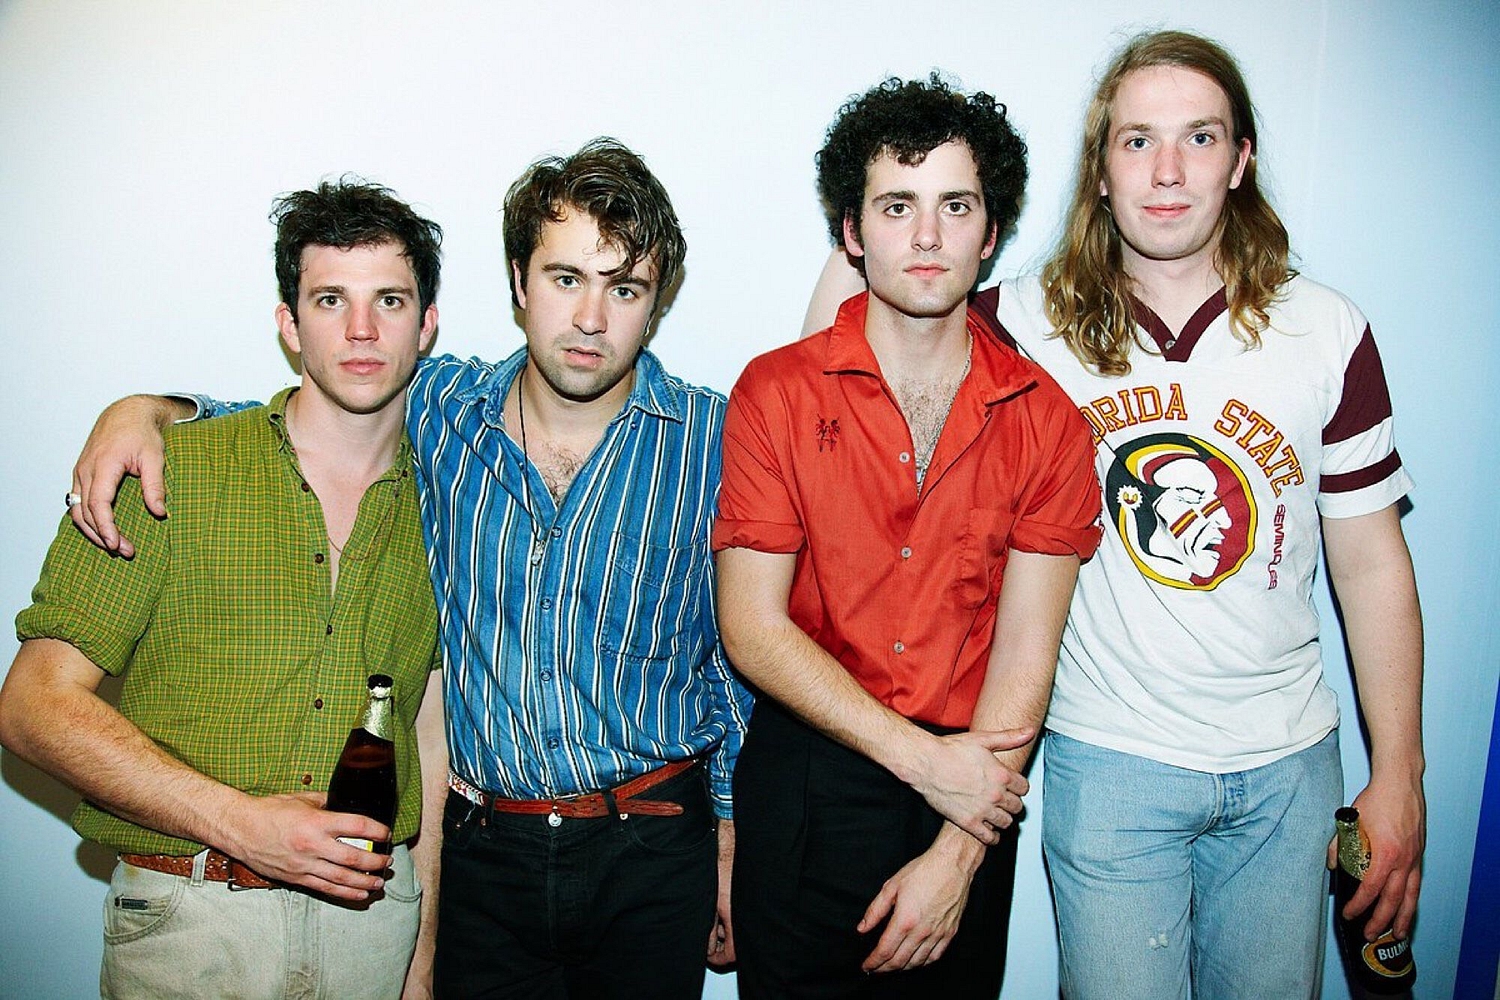 Hall Of Fame: 'What Did You Expect From The Vaccines?'